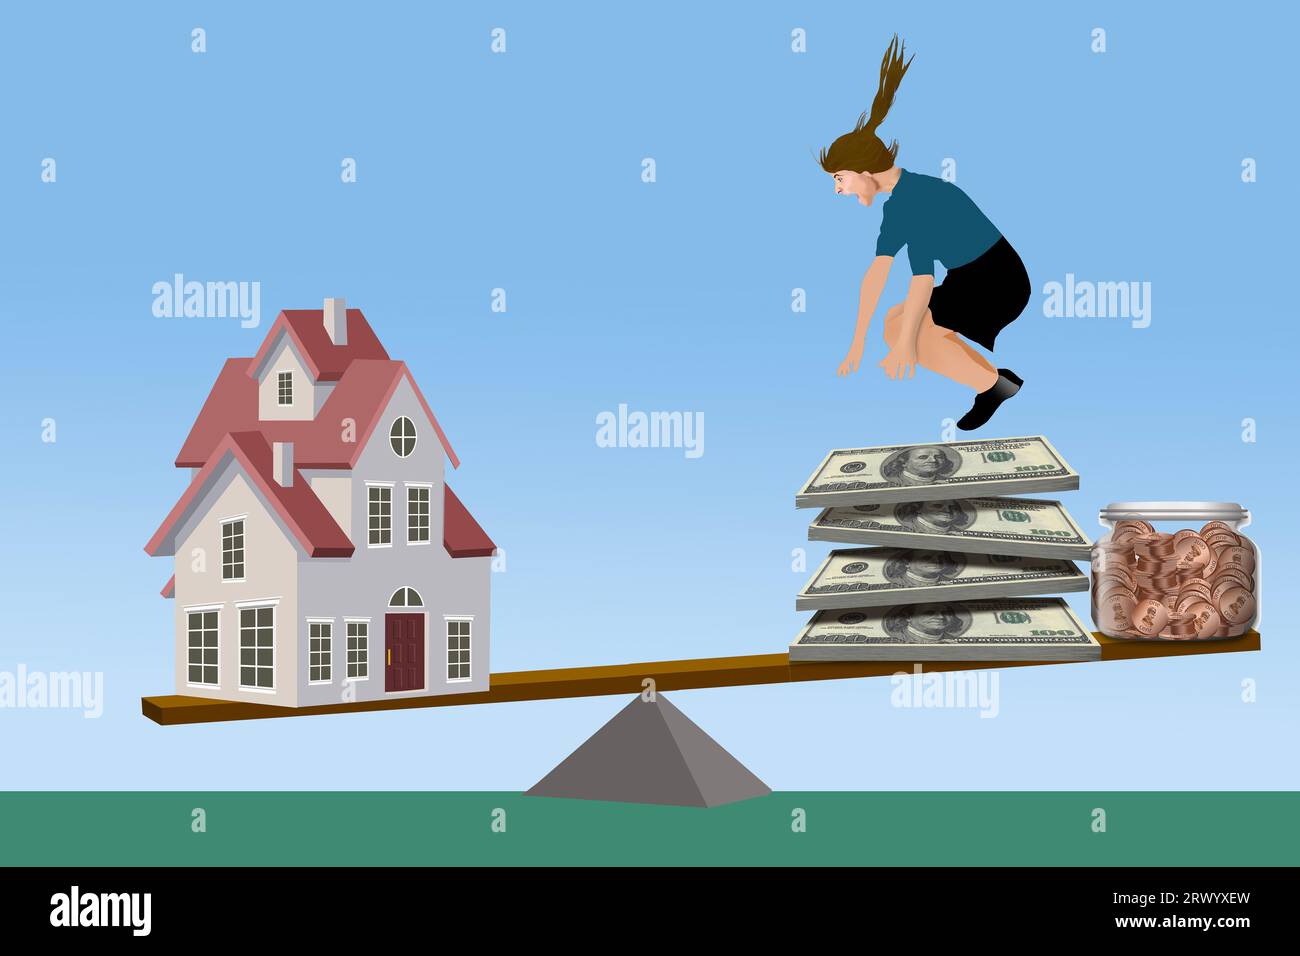 A woman jumps up and down trying to get her money to be able to make a down payment on a home at the other end of a teeter totter, seesaw in a 3-d ill Stock Photo